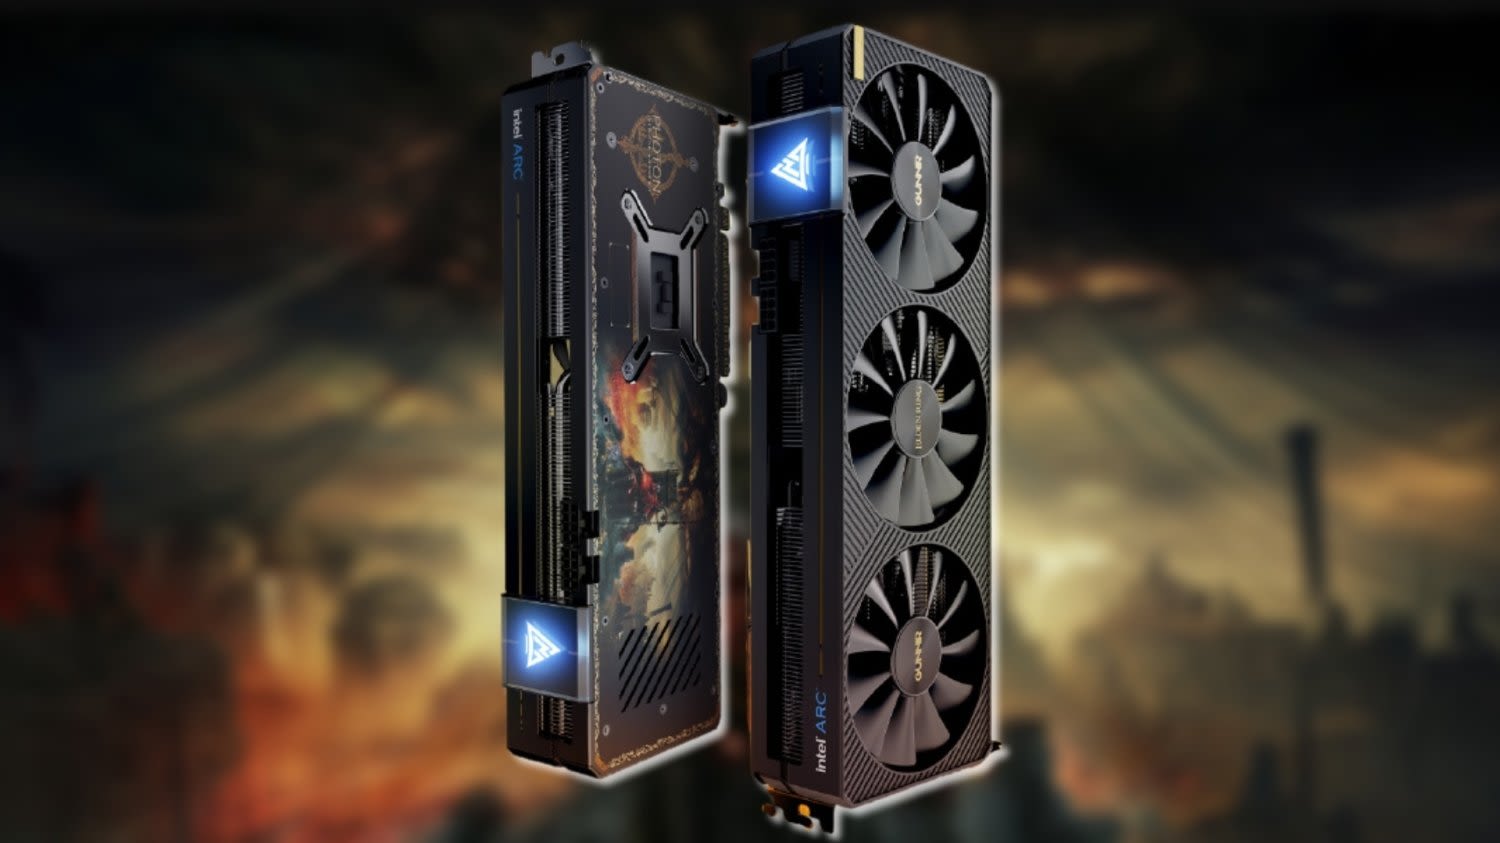 Elden Ring special edition graphics cards are coming and they're Intel Arc A770 and A750s